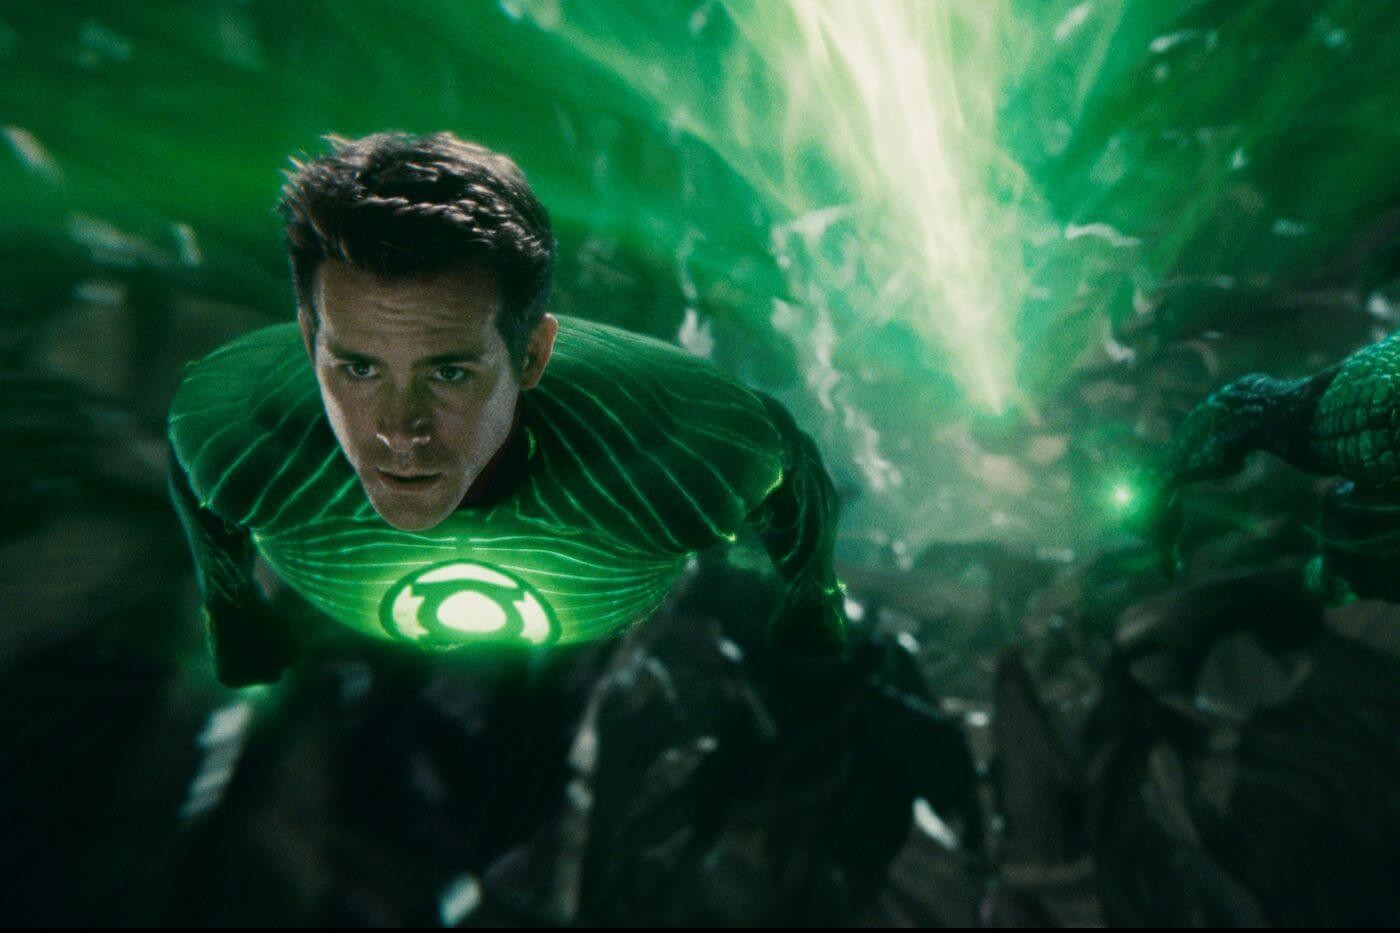 There's a new Green Lantern in town.